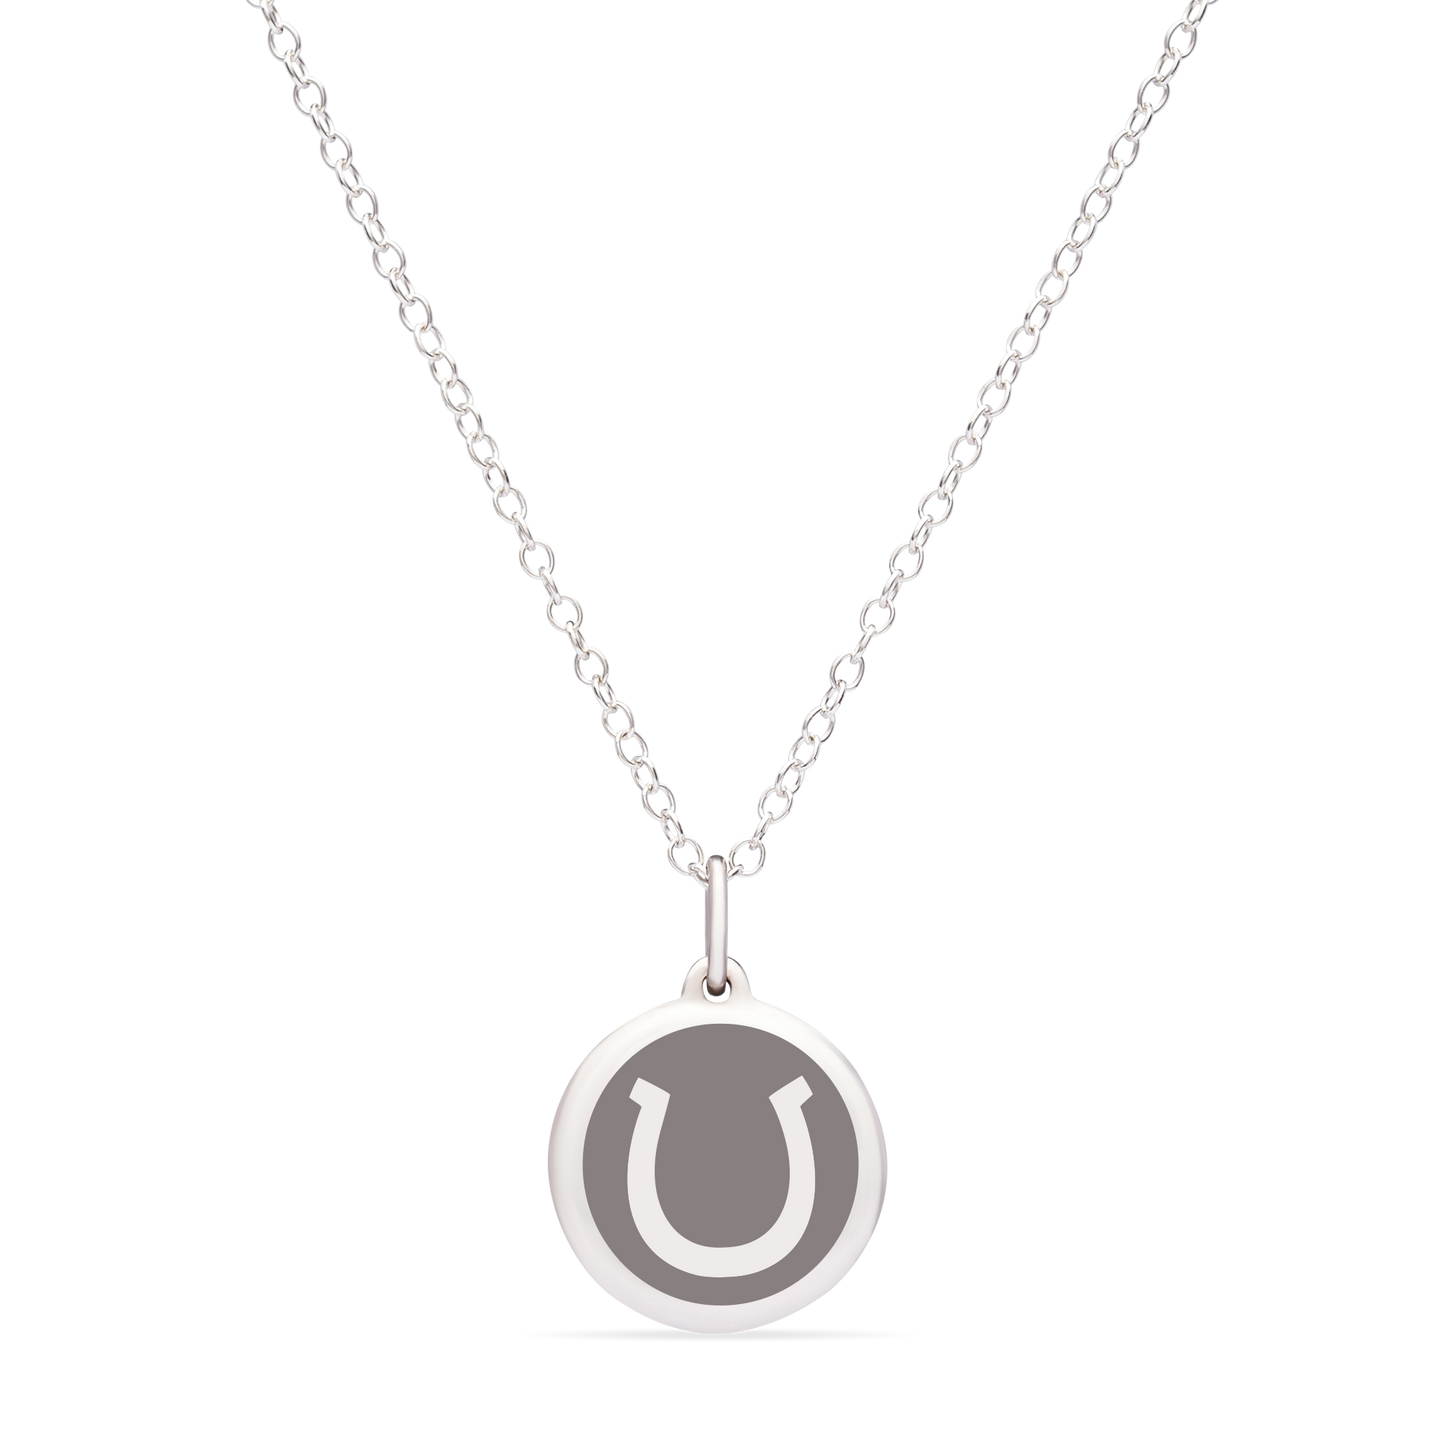 MINI HORSESHOE CHARM sterling silver with rhodium plate